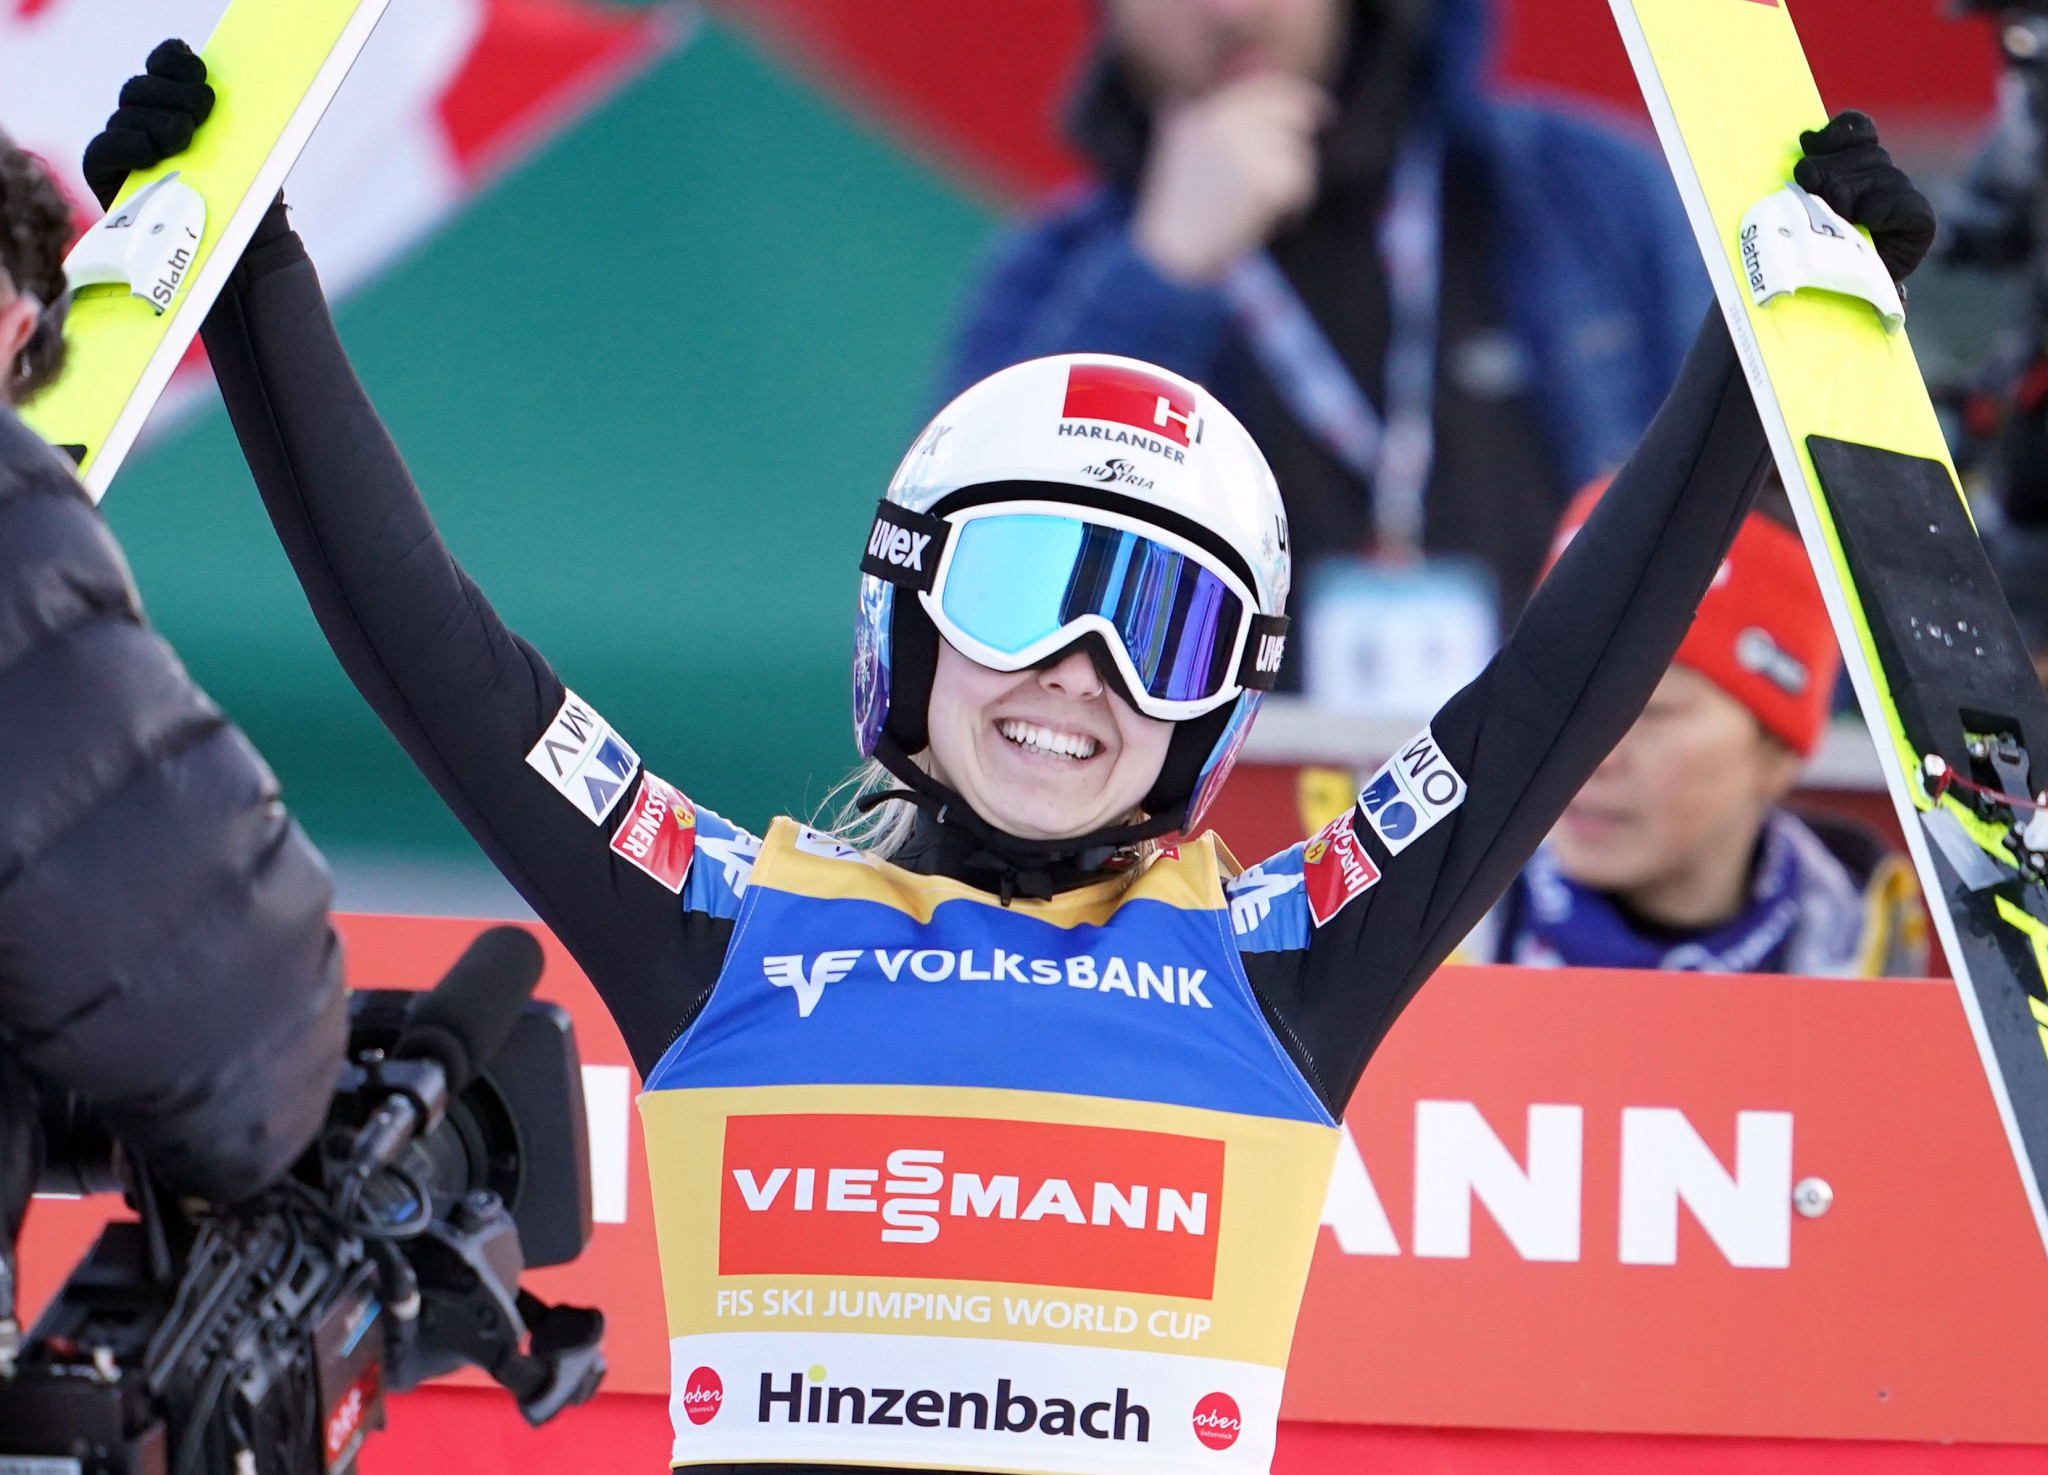 Chiara Hoelzl of Austria currently leads the women's FIS Ski Jumping World Cup standings ©Getty Images